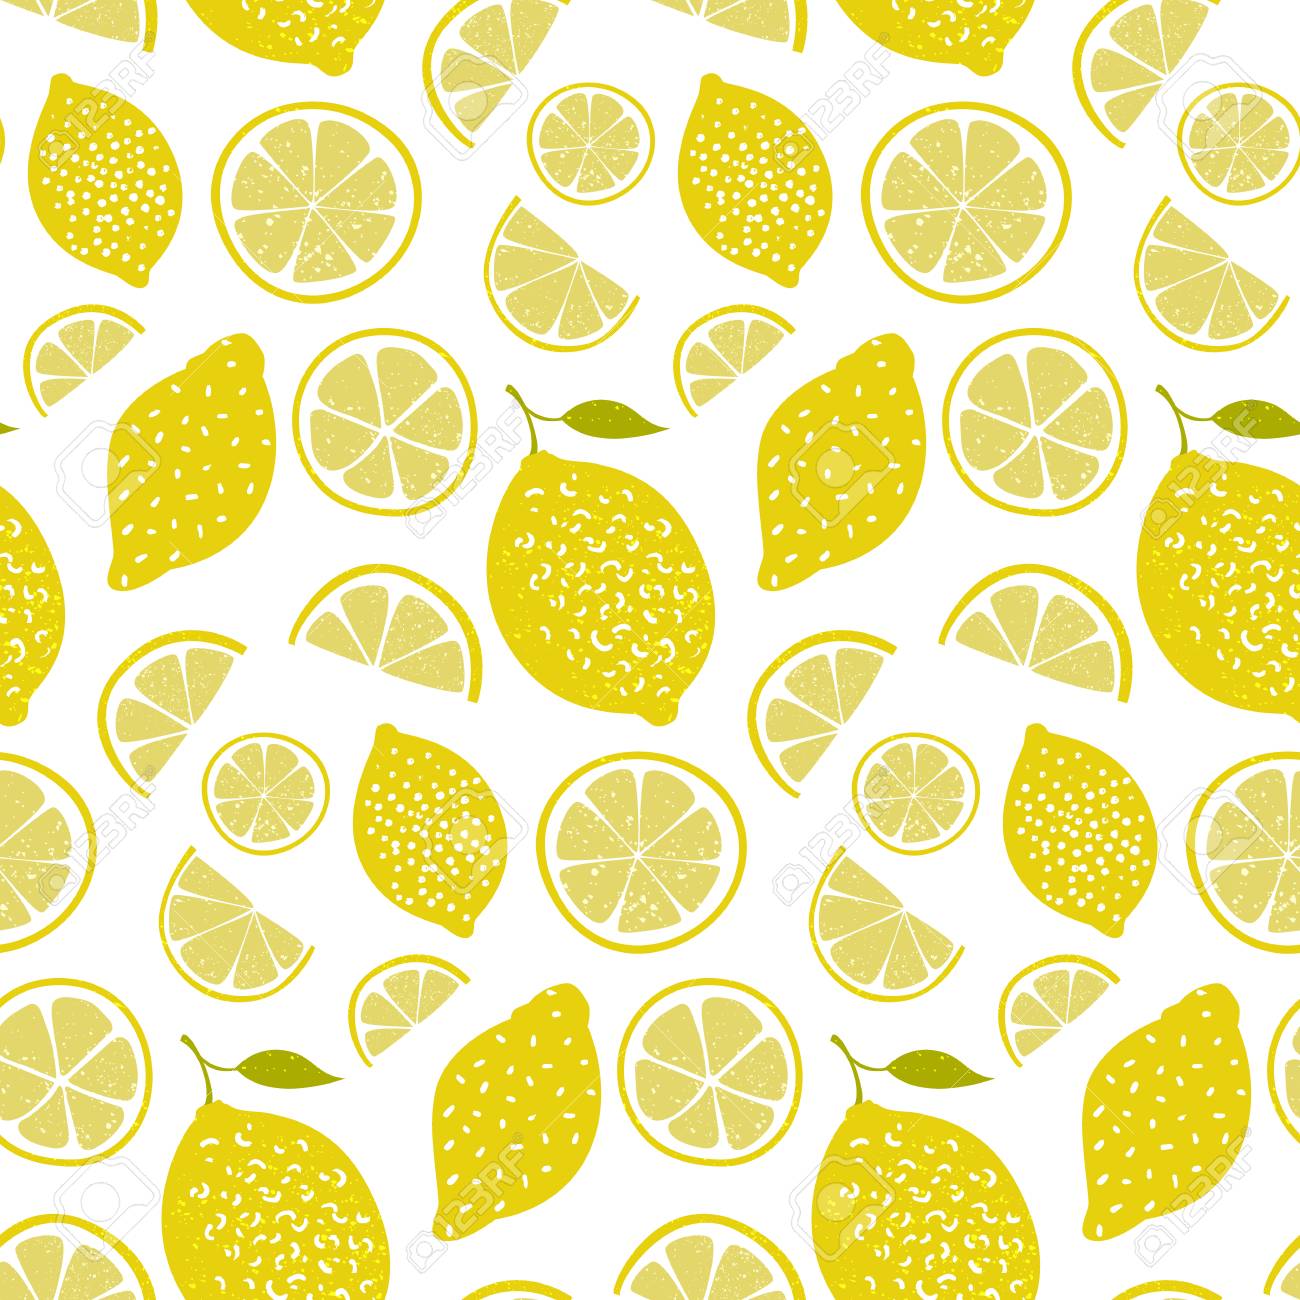 Fresh Pattern With Lemons Full Fruits And Slices Vitamin